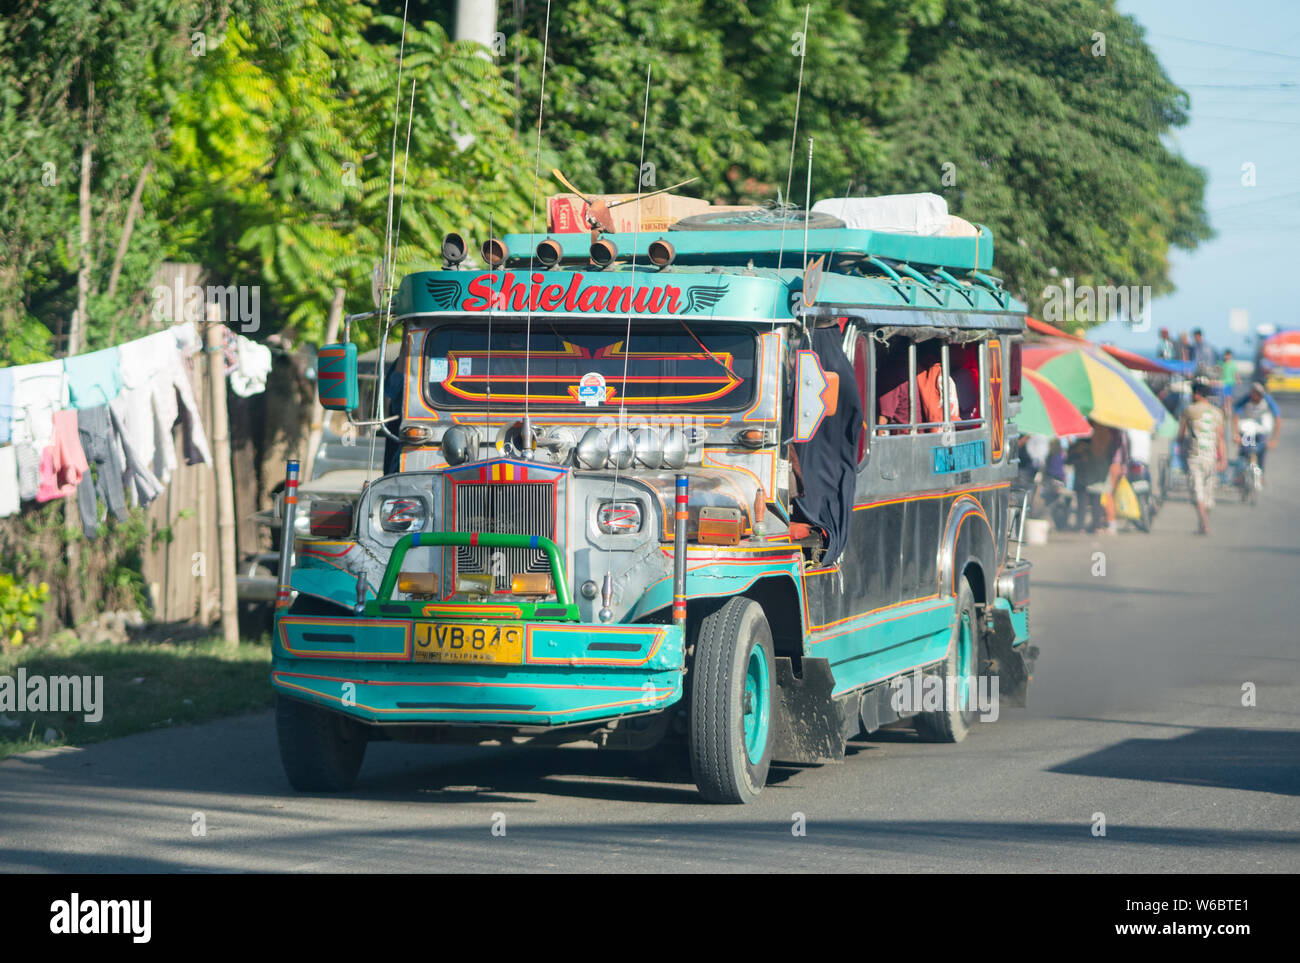 Zamboanga - March 1, 2017: Jeepney in Zamboanga, a city on Mindanao, The Philippines constantly plagued with kidnappings and terrorist attacks by Abu Stock Photo